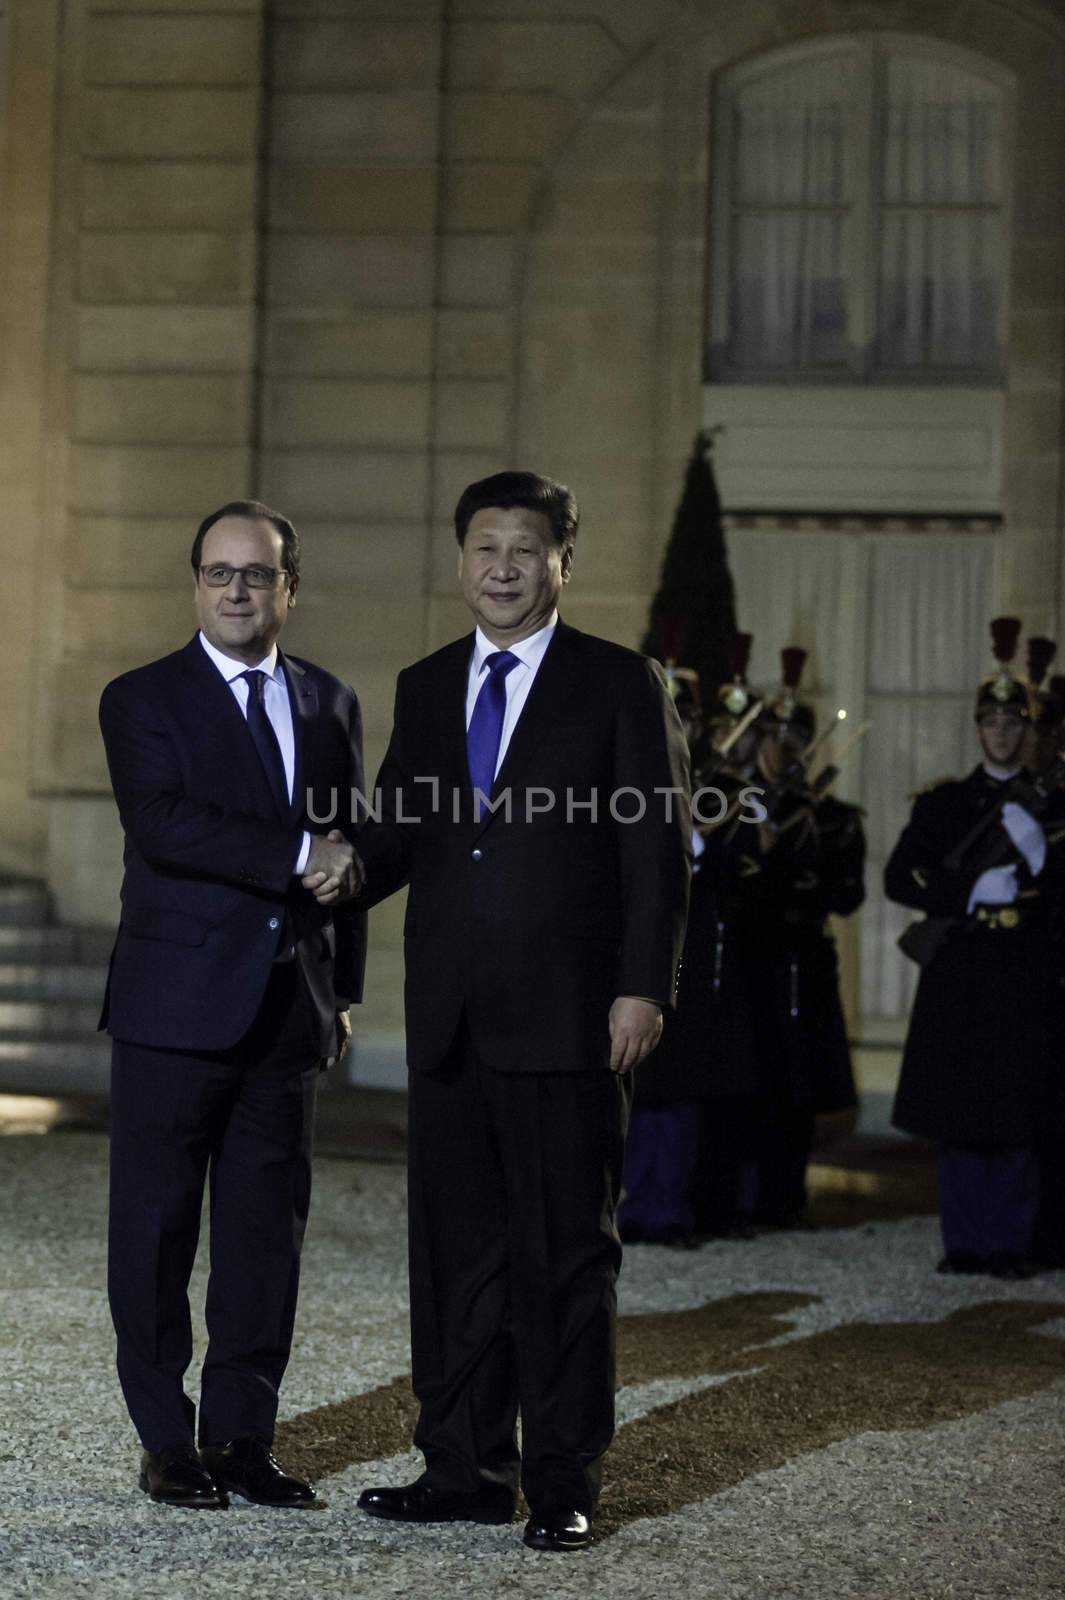 FRANCE, Paris : China's President Xi Jinping (R) shakes hands with France's President Fran�ois Hollande (L) on November 29, 2015 before a dinner meeting at the Elysee palace in Paris. Some 150 leaders including will attend the start on November 30 of the UN conference on climate change, tasked with reaching the first truly universal climate pact.